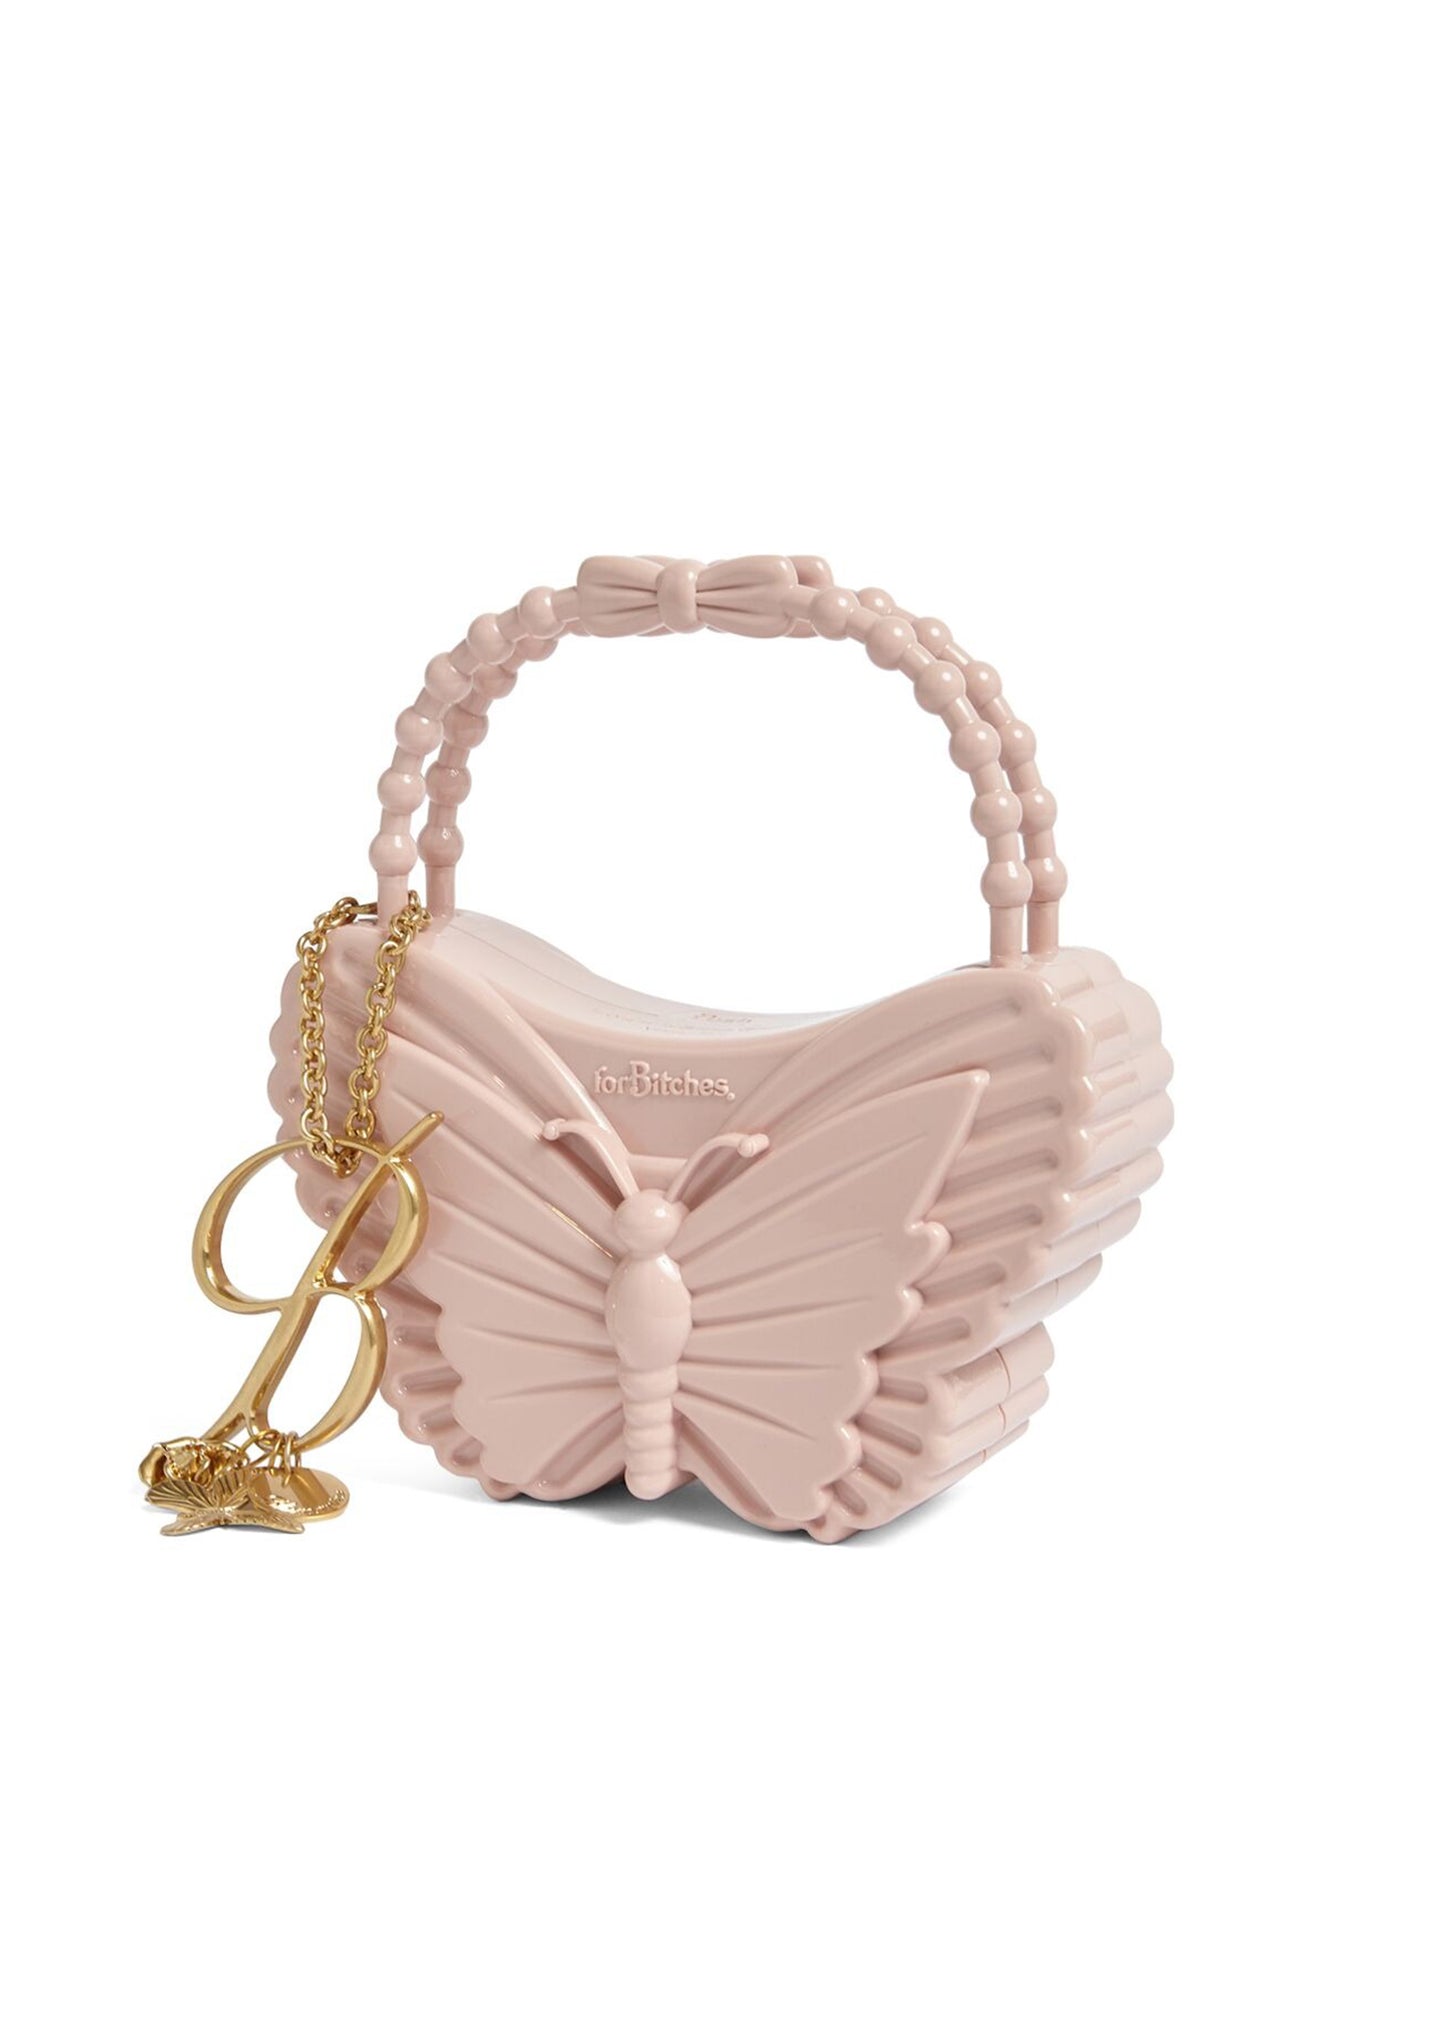 Butterfly-shaped Bag (Collaboration With Forbitches)